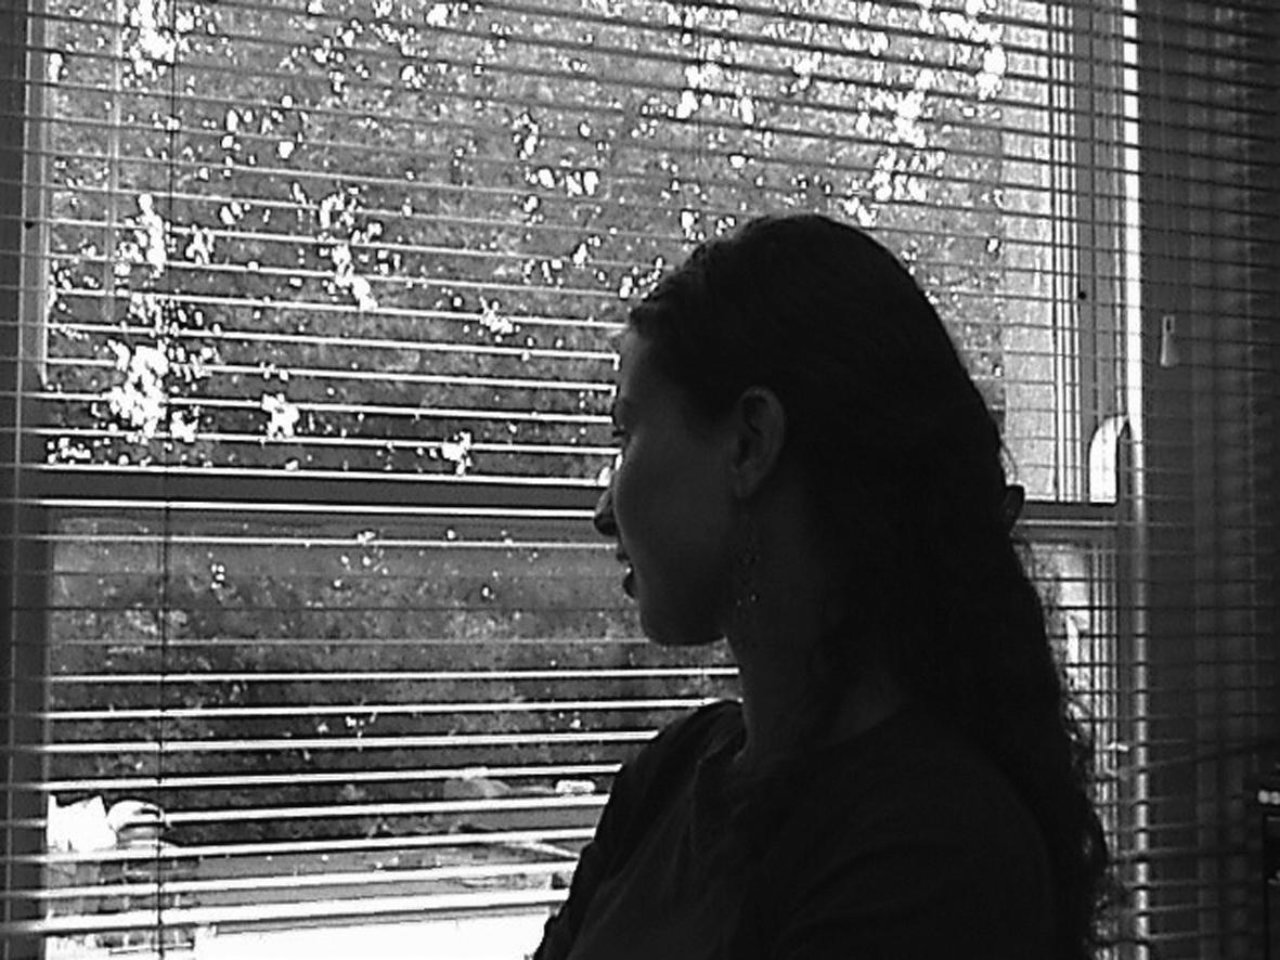 A woman standing at a window looking out of a blind